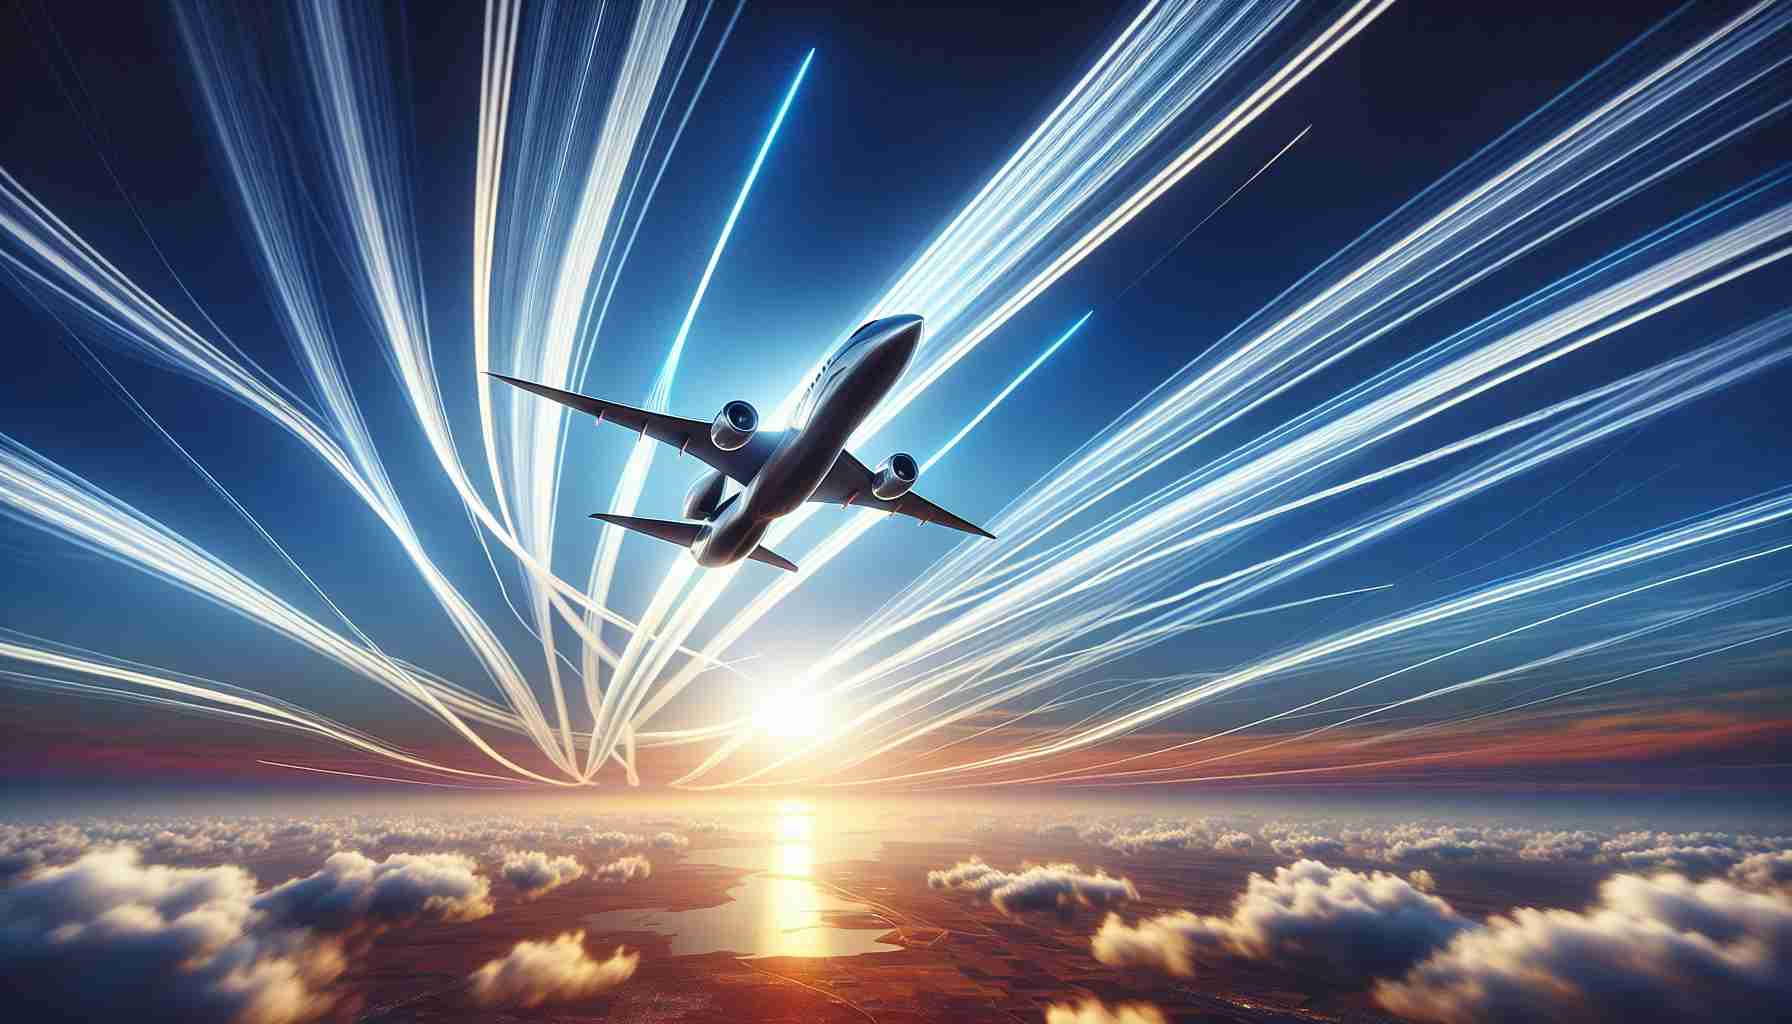 A detailed high-definition image showcasing an innovative and sleek modern aircraft (not associated with any specific aviation company) as it takes flight. The contrails streak like ribbons across the sky behind it, symbolizing a new era in aviation technology and design. The sky is a radiant blue, with wispy clouds scattered here and there, while the sun sets on the horizon painting hues of vibrant oranges and purples. The aircraft itself is depicted as a symbol of human ingenuity and future innovation in the field of aerospace.